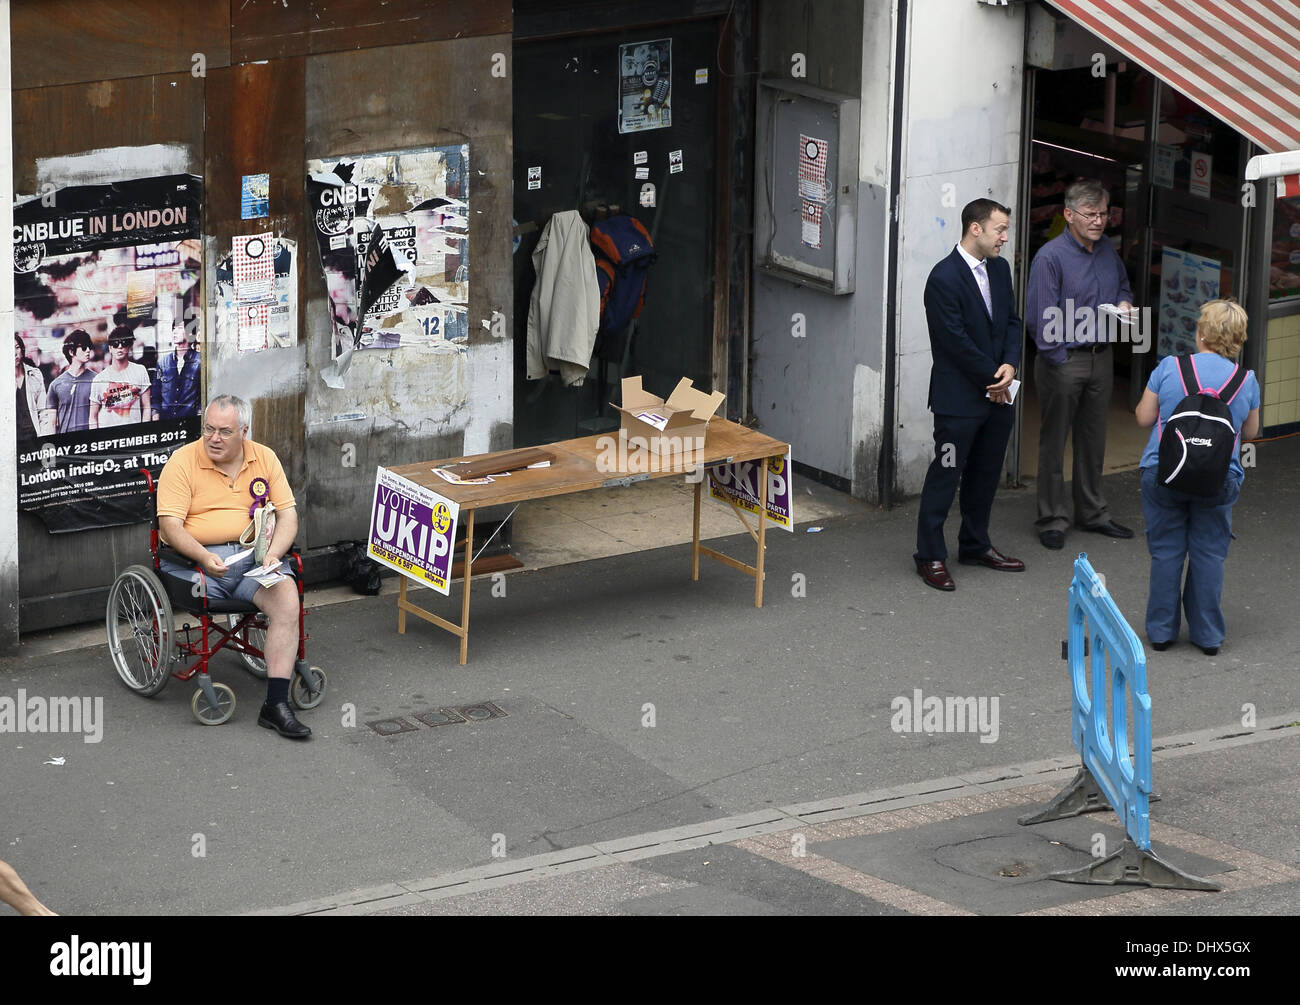 Disabled man campaigning for UKIP. Stock Photo